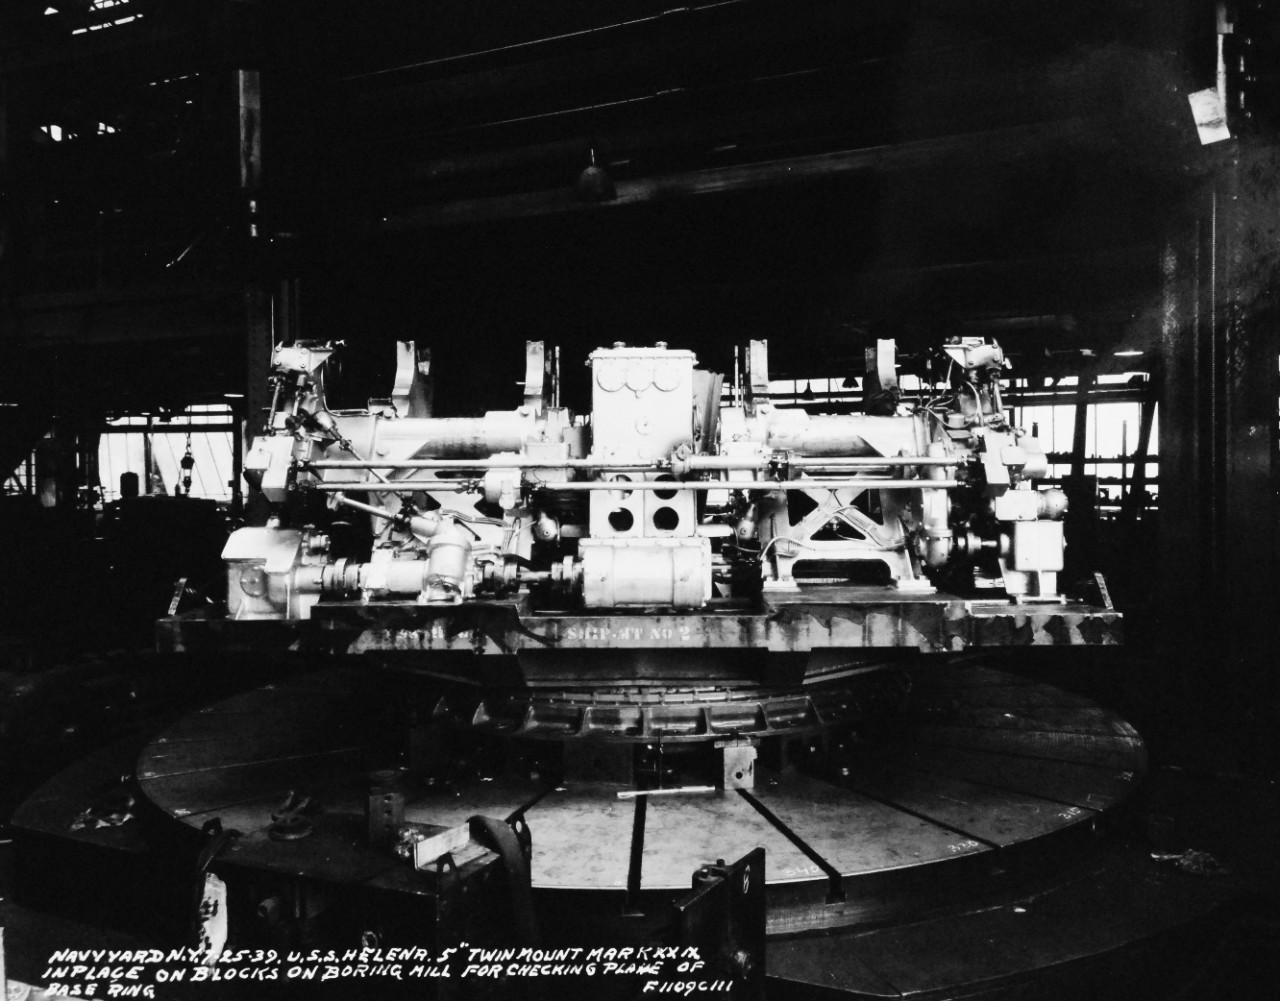 19-LC-23175:   USS Helena (CL 50), June 1939.   The cruiser is at the New York (also known as Brooklyn) Navy Yard, New York City, New York, showing the 5” Twin Mount in place on blocks on boring mill for checking plane of base ring, June 25, 1939.  Official Bureau of Ships Photograph, now in the collections of the National Archives.   (2015/2/18). 